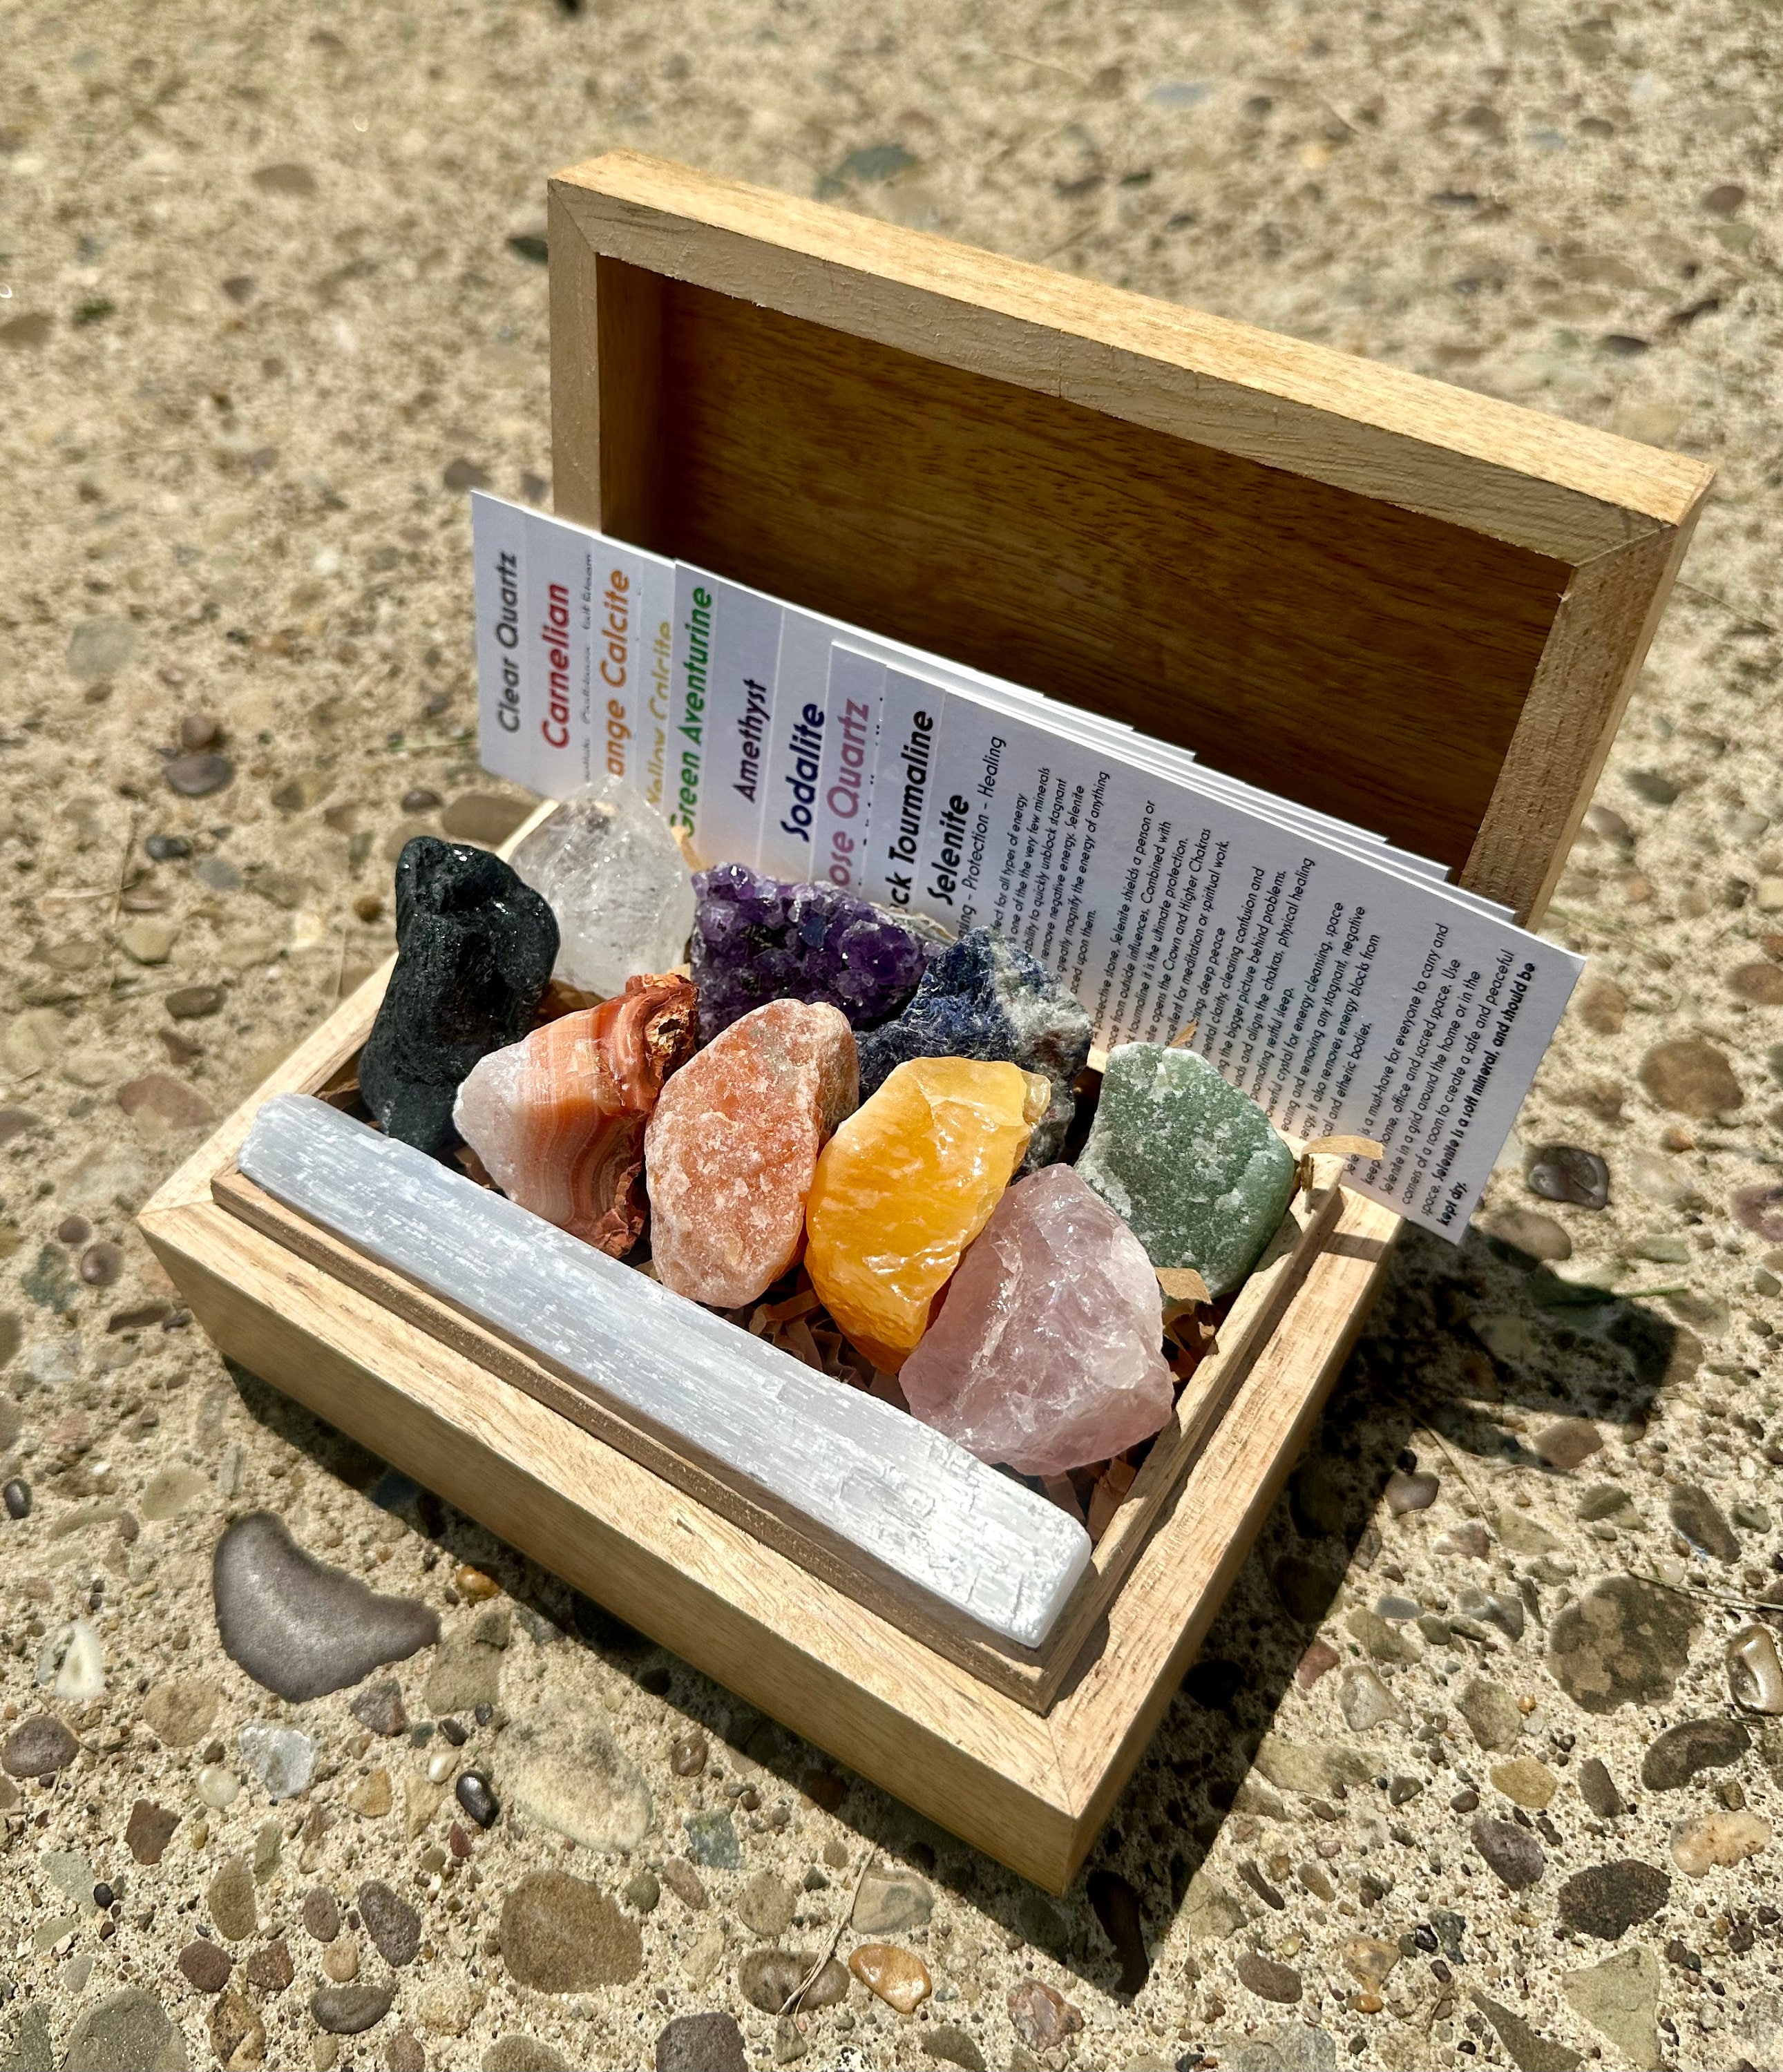 Healing Crystals Set for Beginners Natural Chakra Stones Set with Gift Box Pendant and Bracelet Crystals and Gemstones Healing Set for Relaxation and